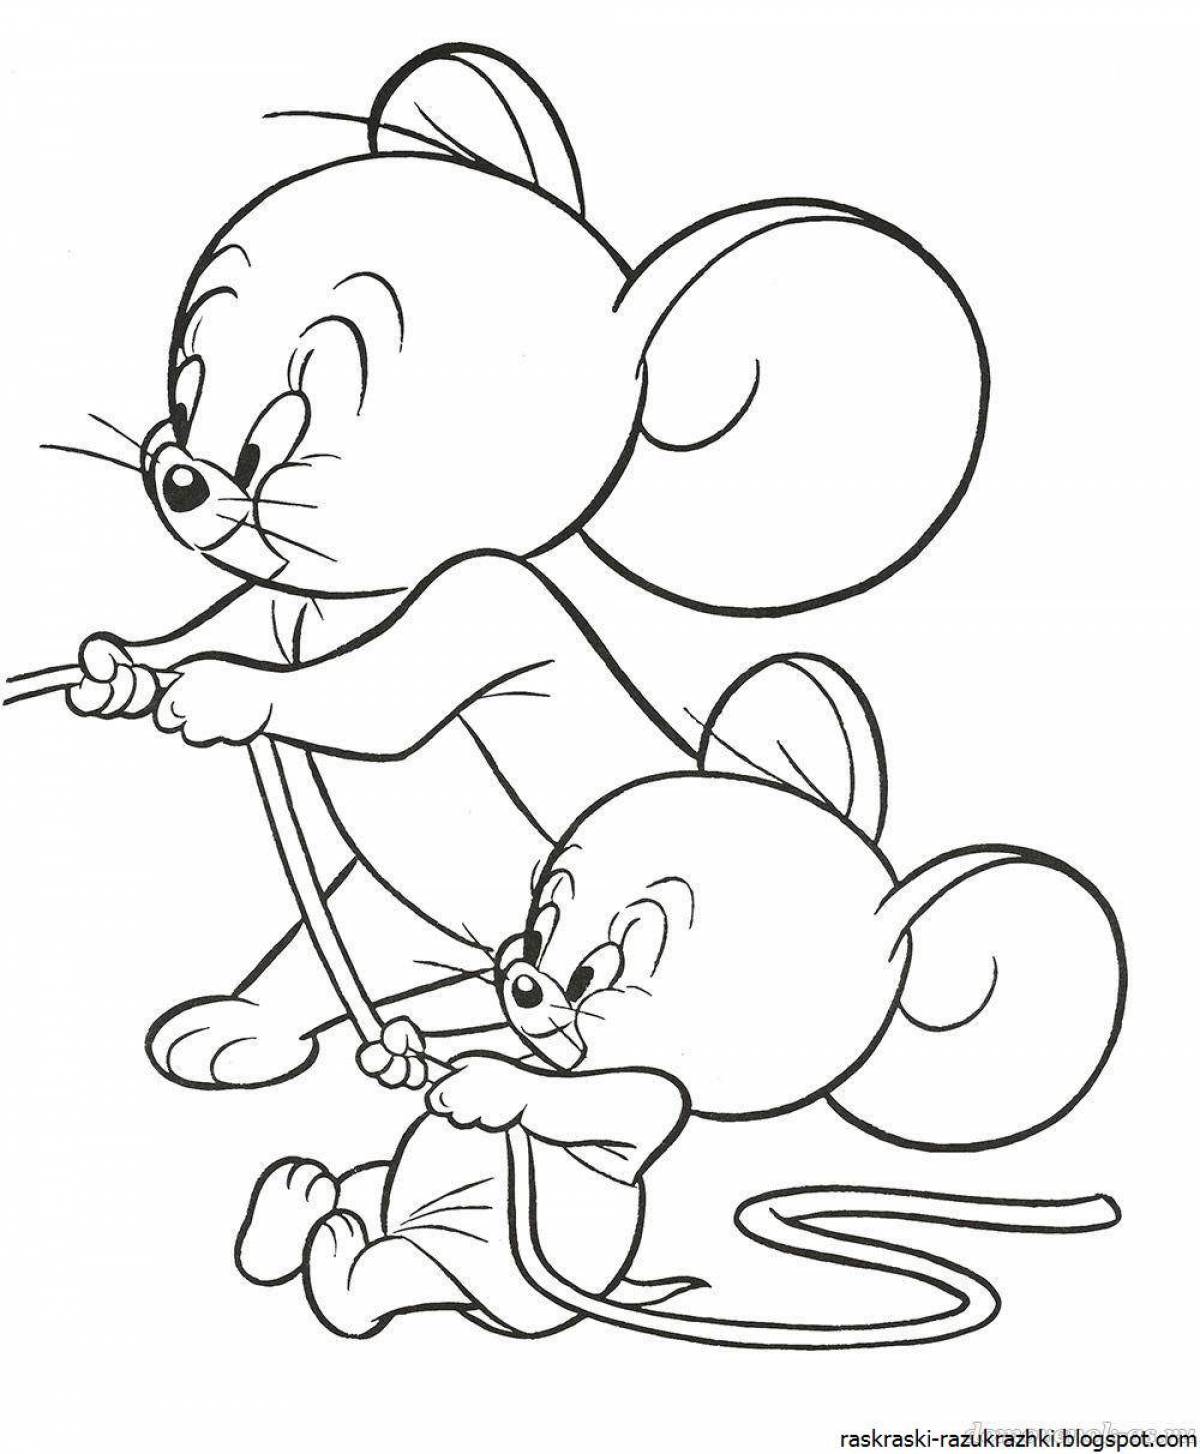 Adorable mouse coloring page